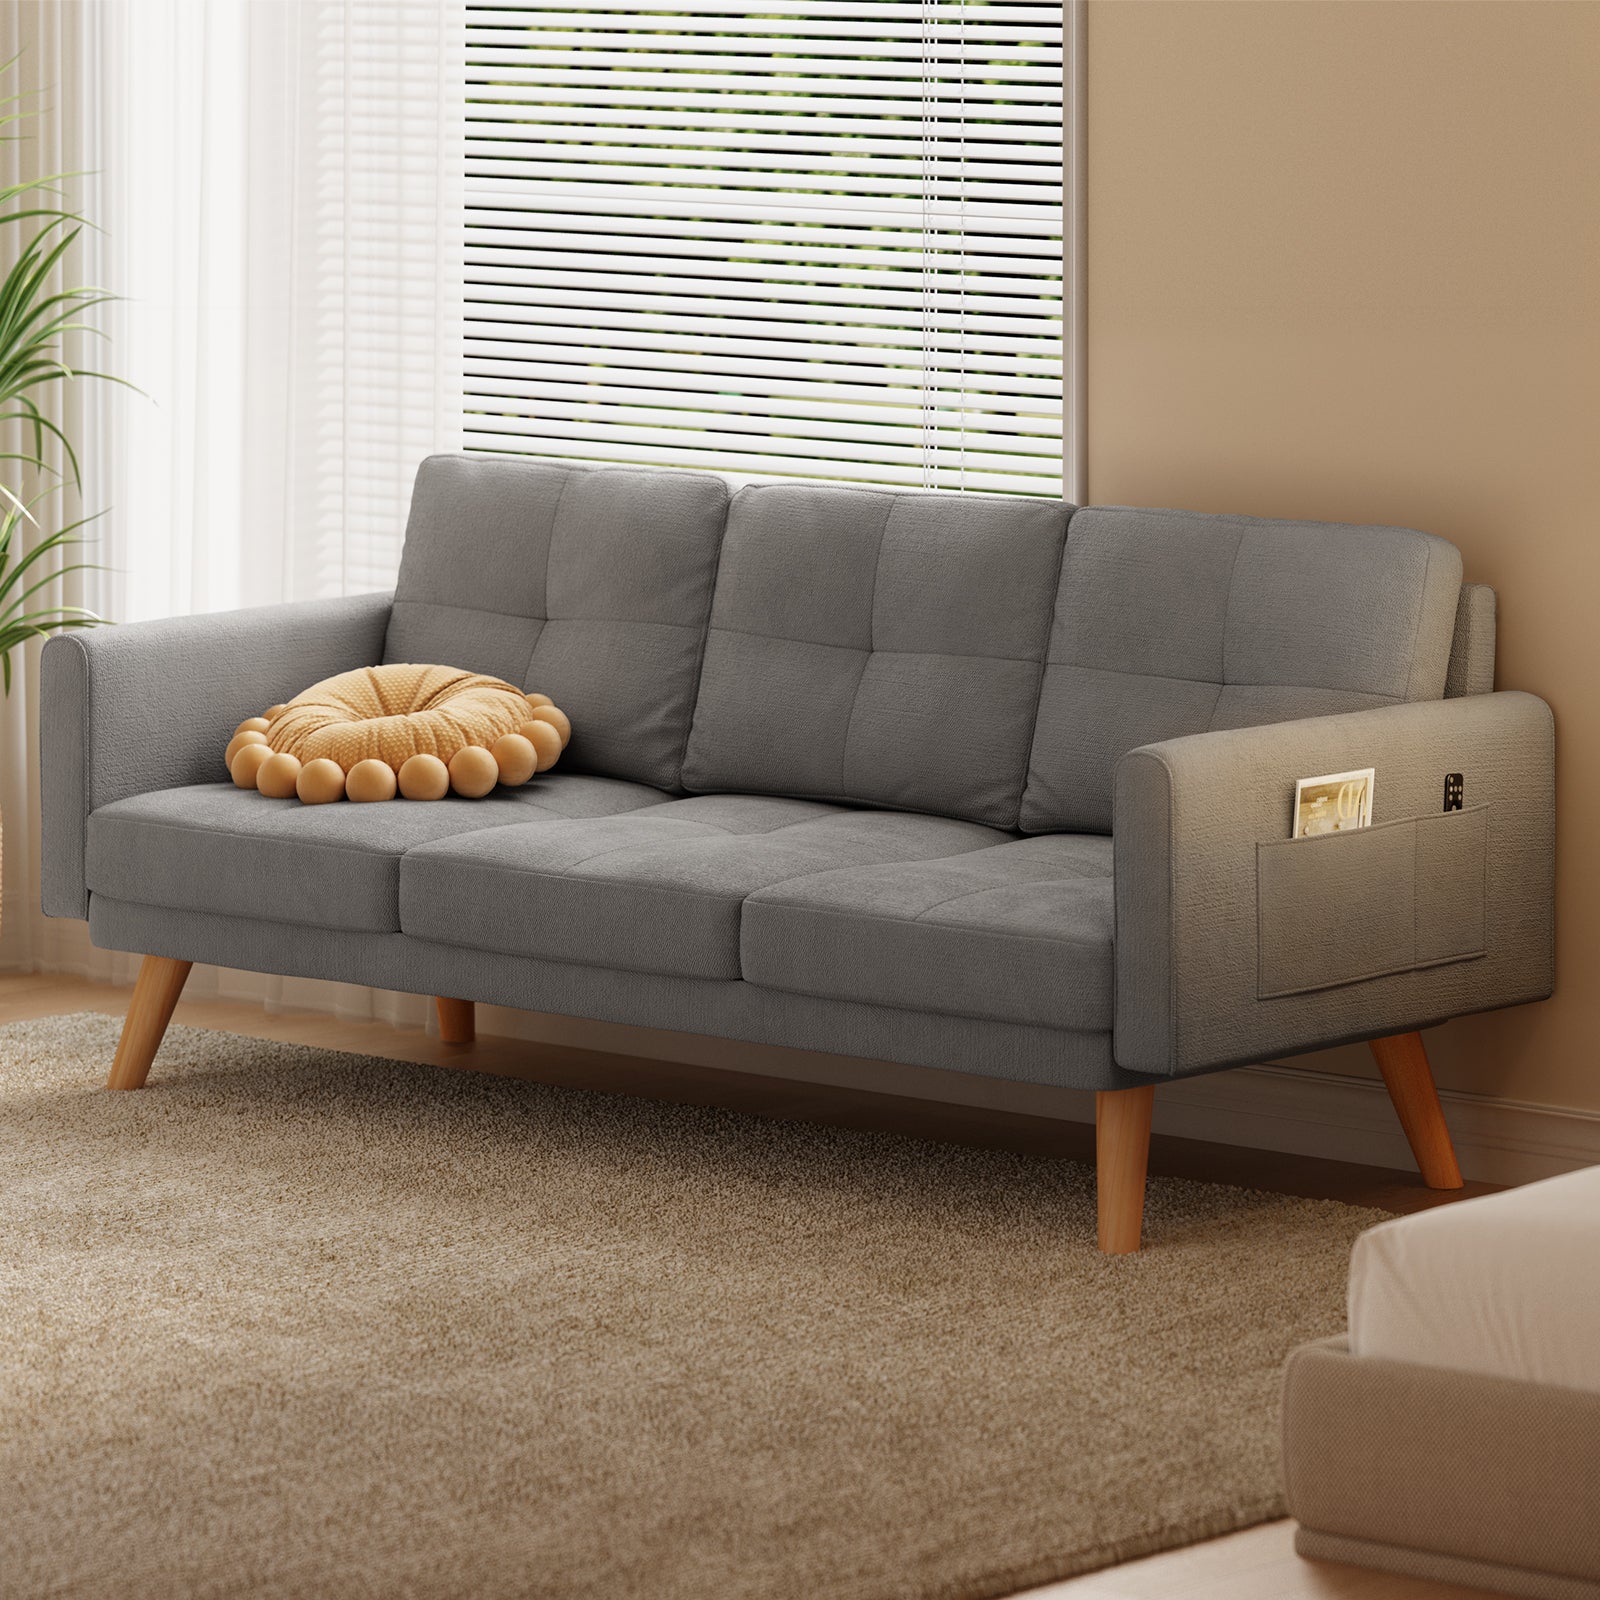 Gizoon AR80 67” Sofa Couch with Soft Armrest for Living Room and Small Spaces